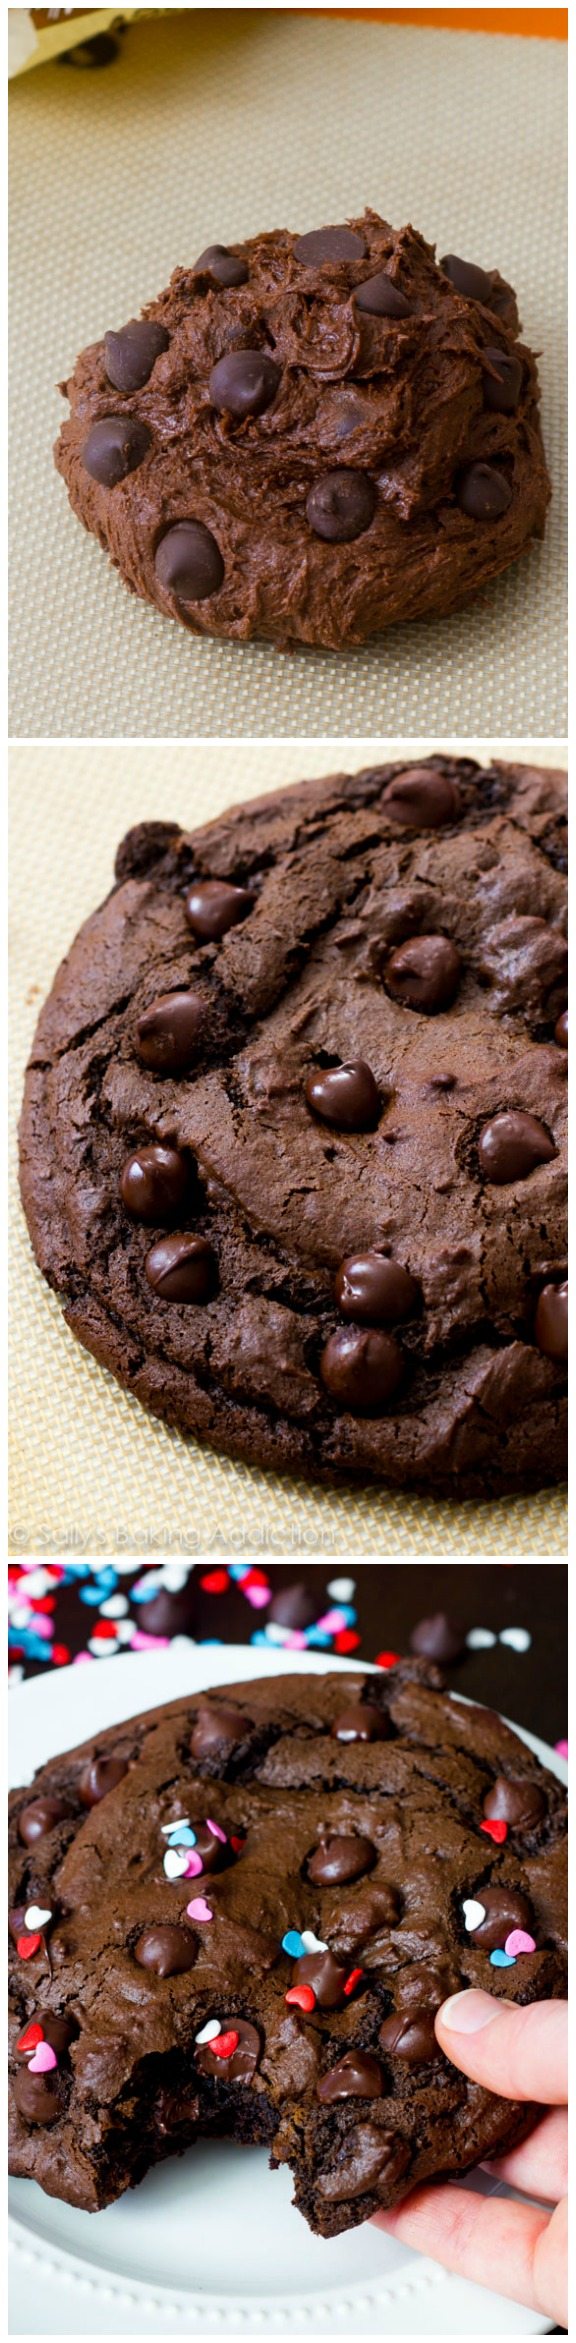 3 images of one giant chocolate cookie